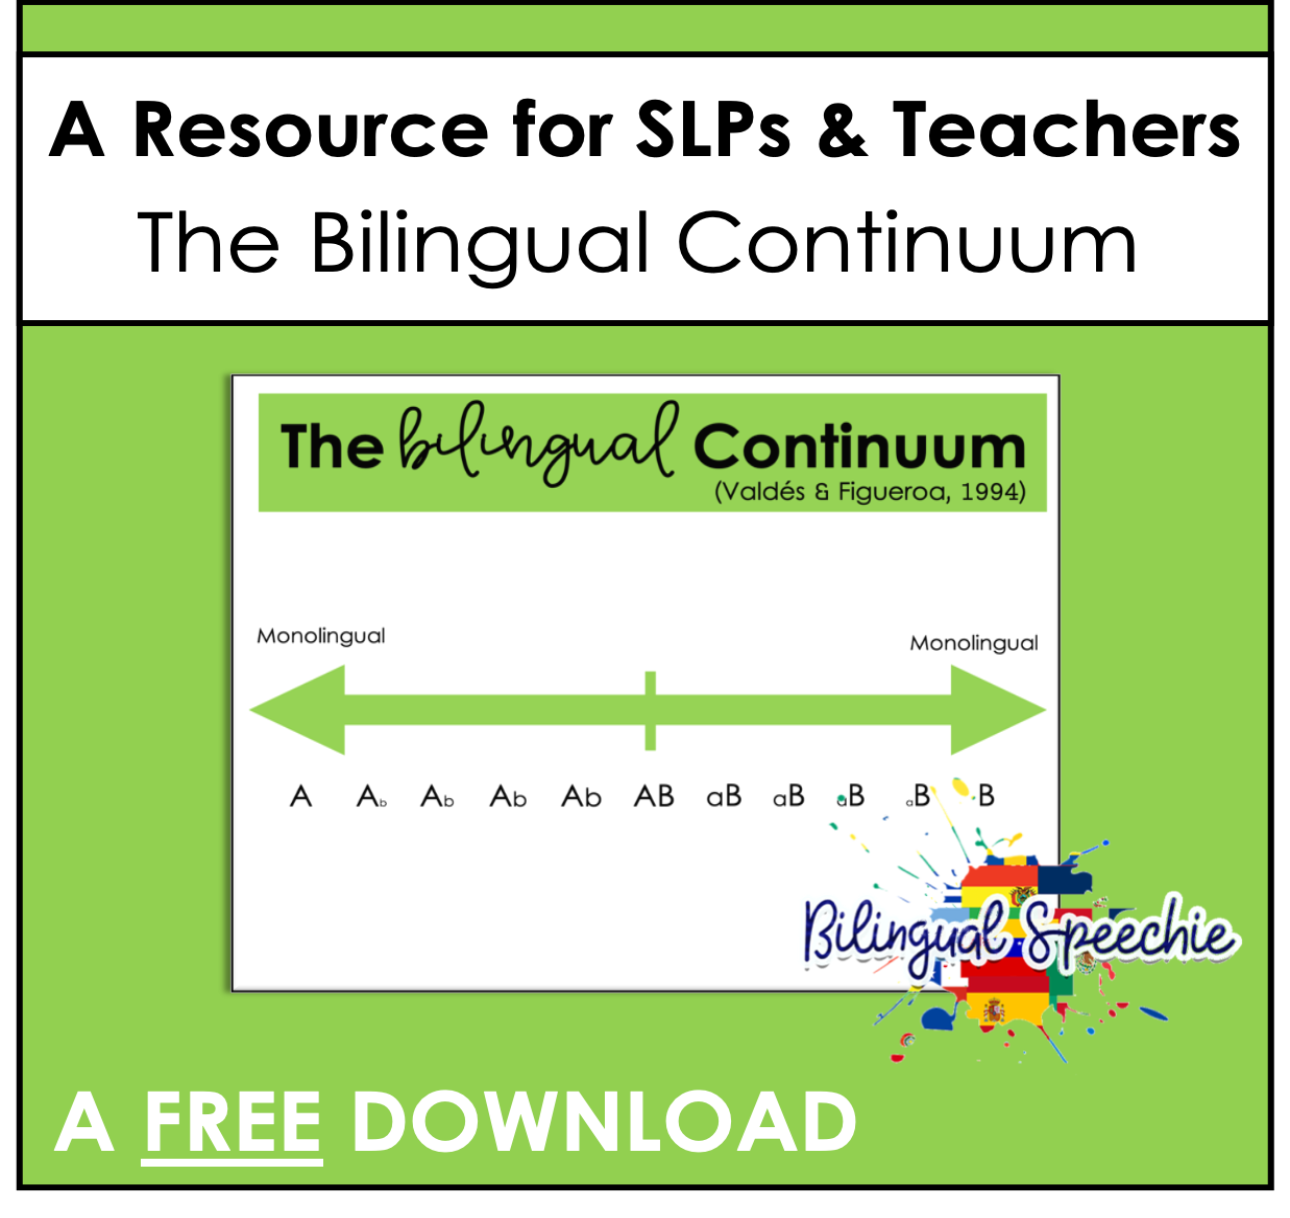 The Bilingual Continuum | A Resource for SLPs & Teachers